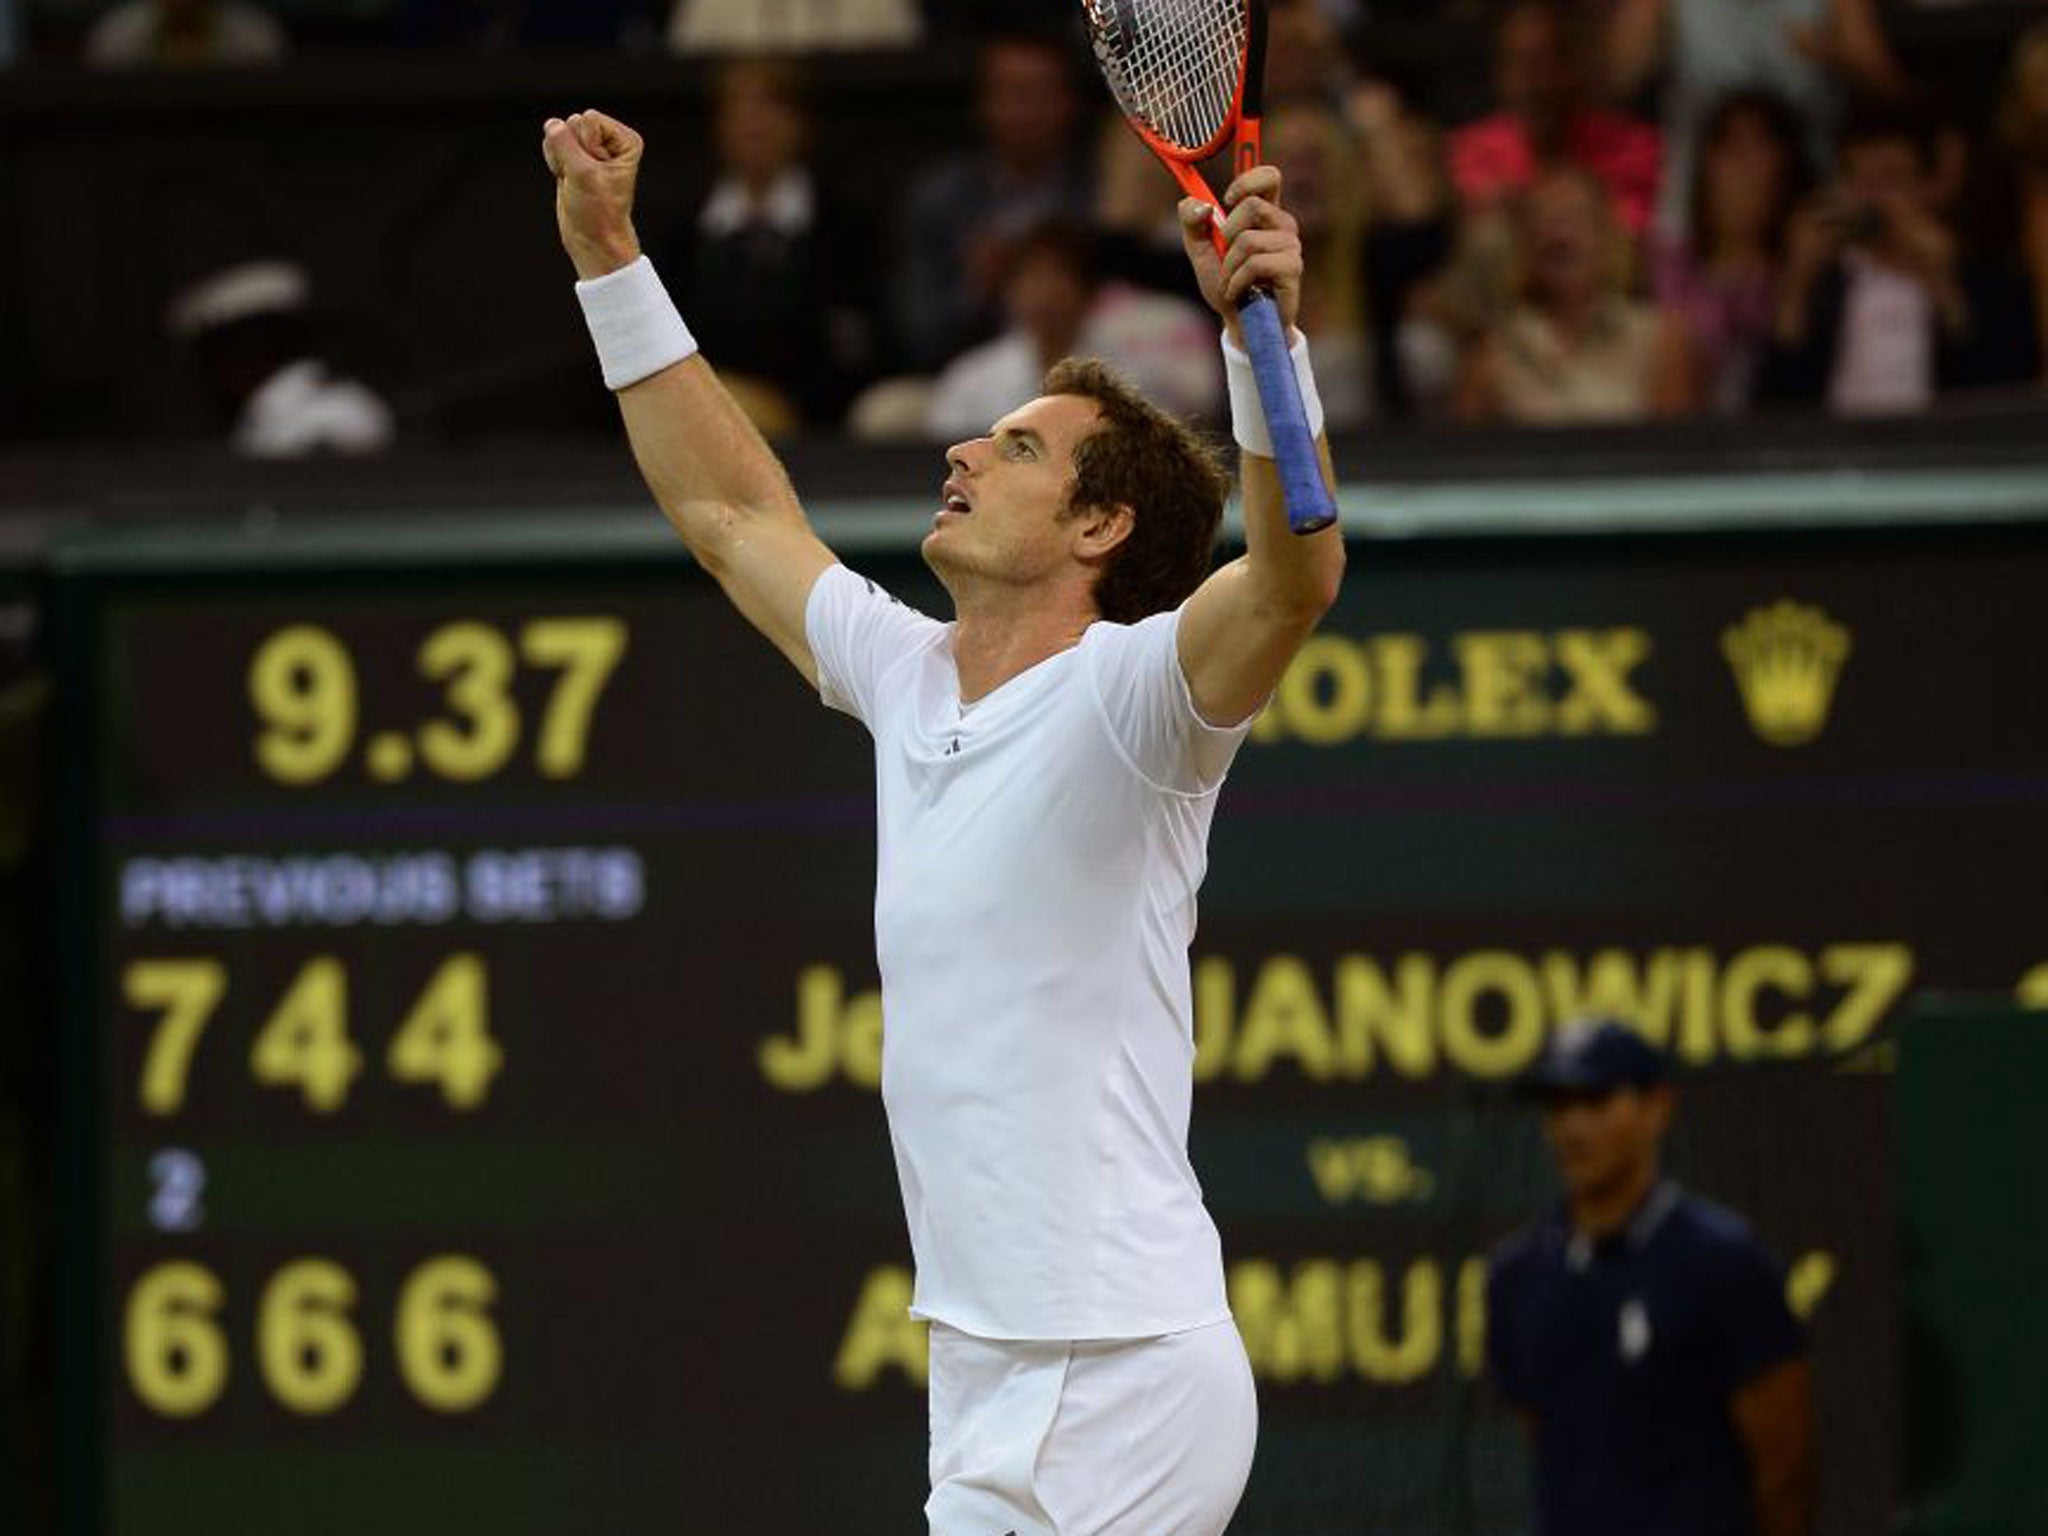 Andy Murray celebrates his victory over Jerzt Janowicz